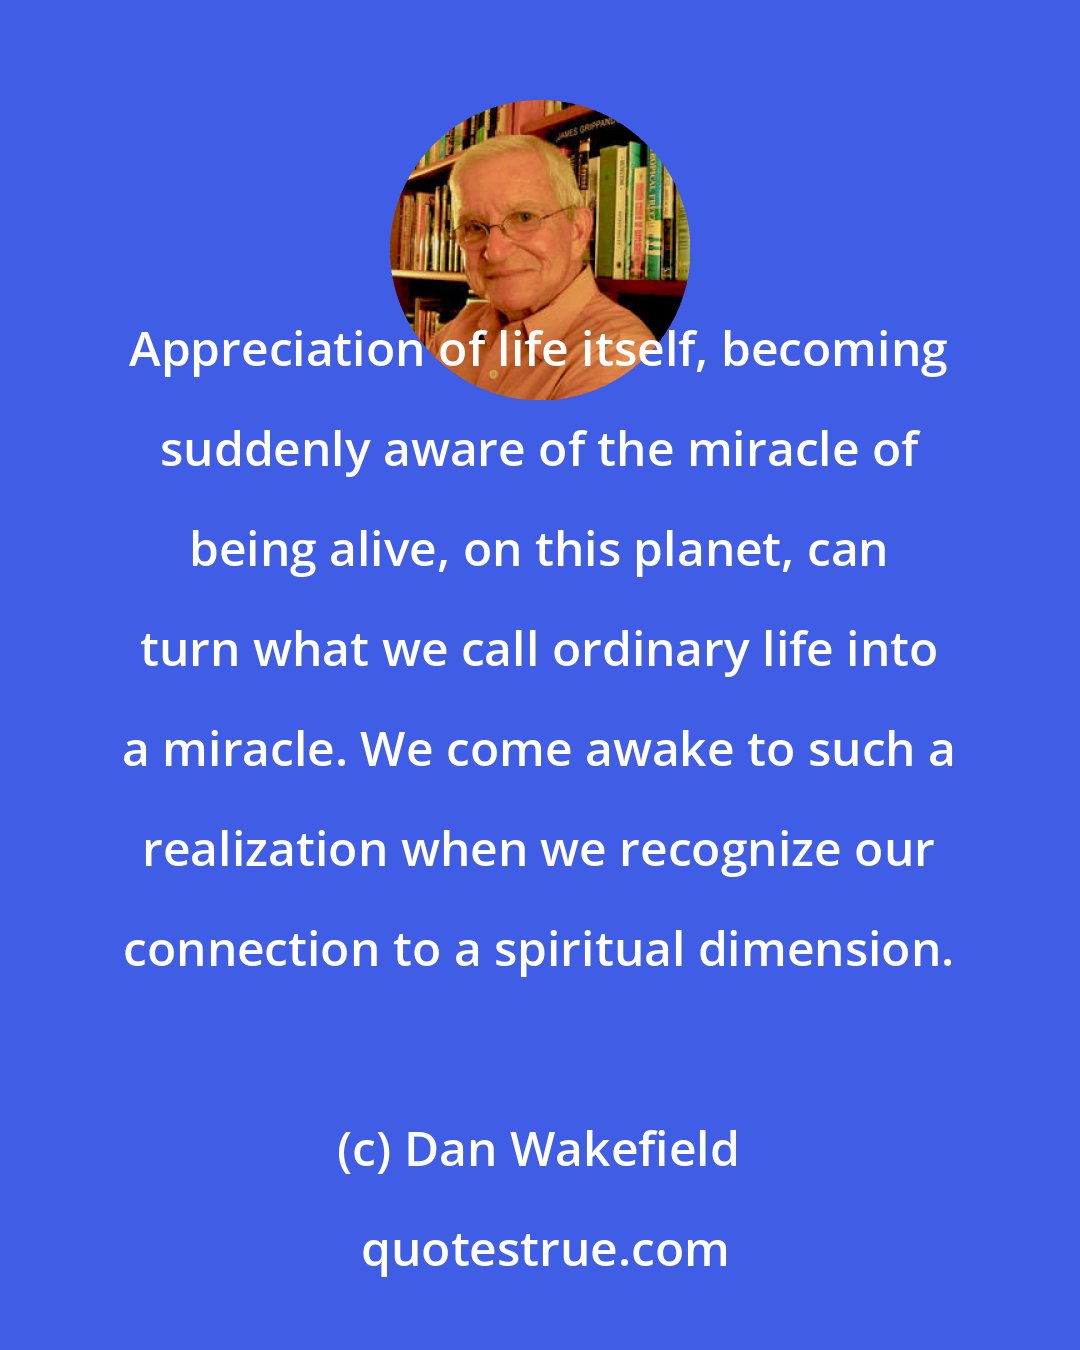 Dan Wakefield: Appreciation of life itself, becoming suddenly aware of the miracle of being alive, on this planet, can turn what we call ordinary life into a miracle. We come awake to such a realization when we recognize our connection to a spiritual dimension.